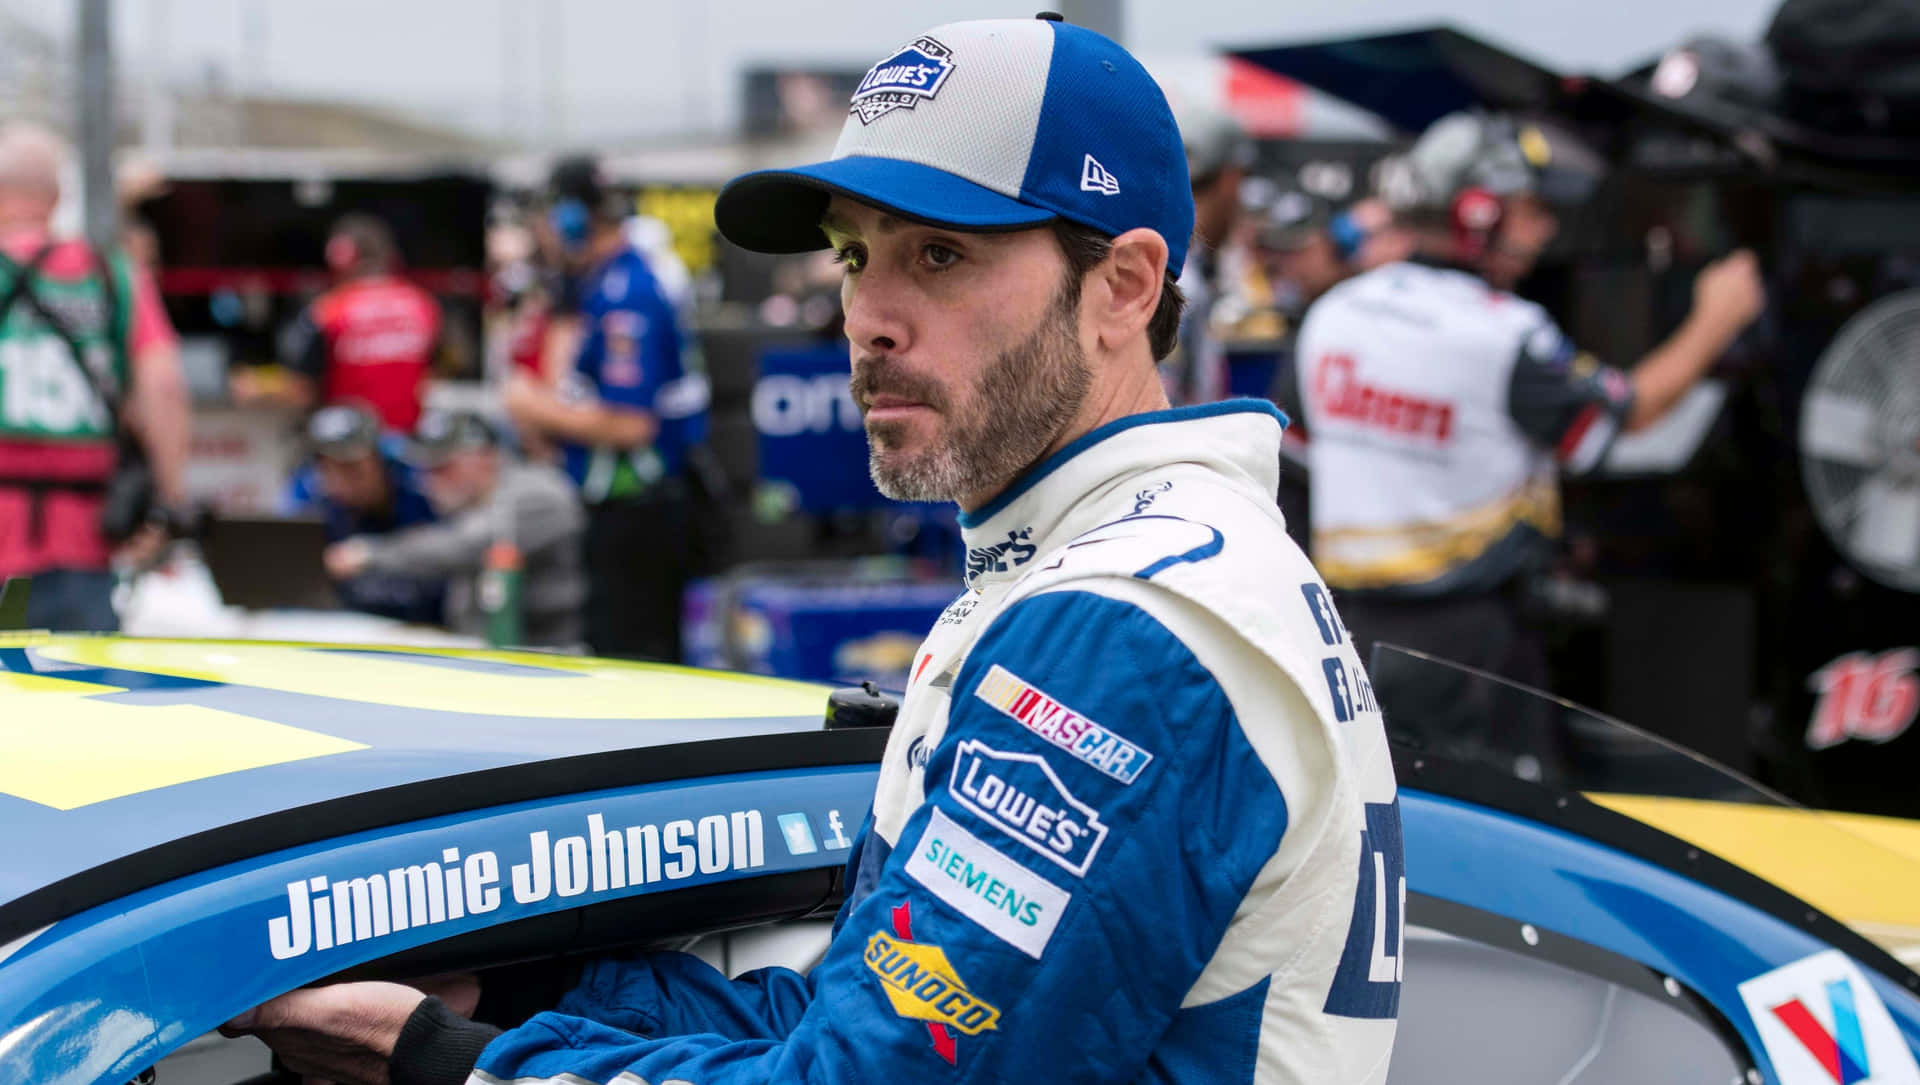 Jimmie Johnson racing on the track in his iconic car Wallpaper